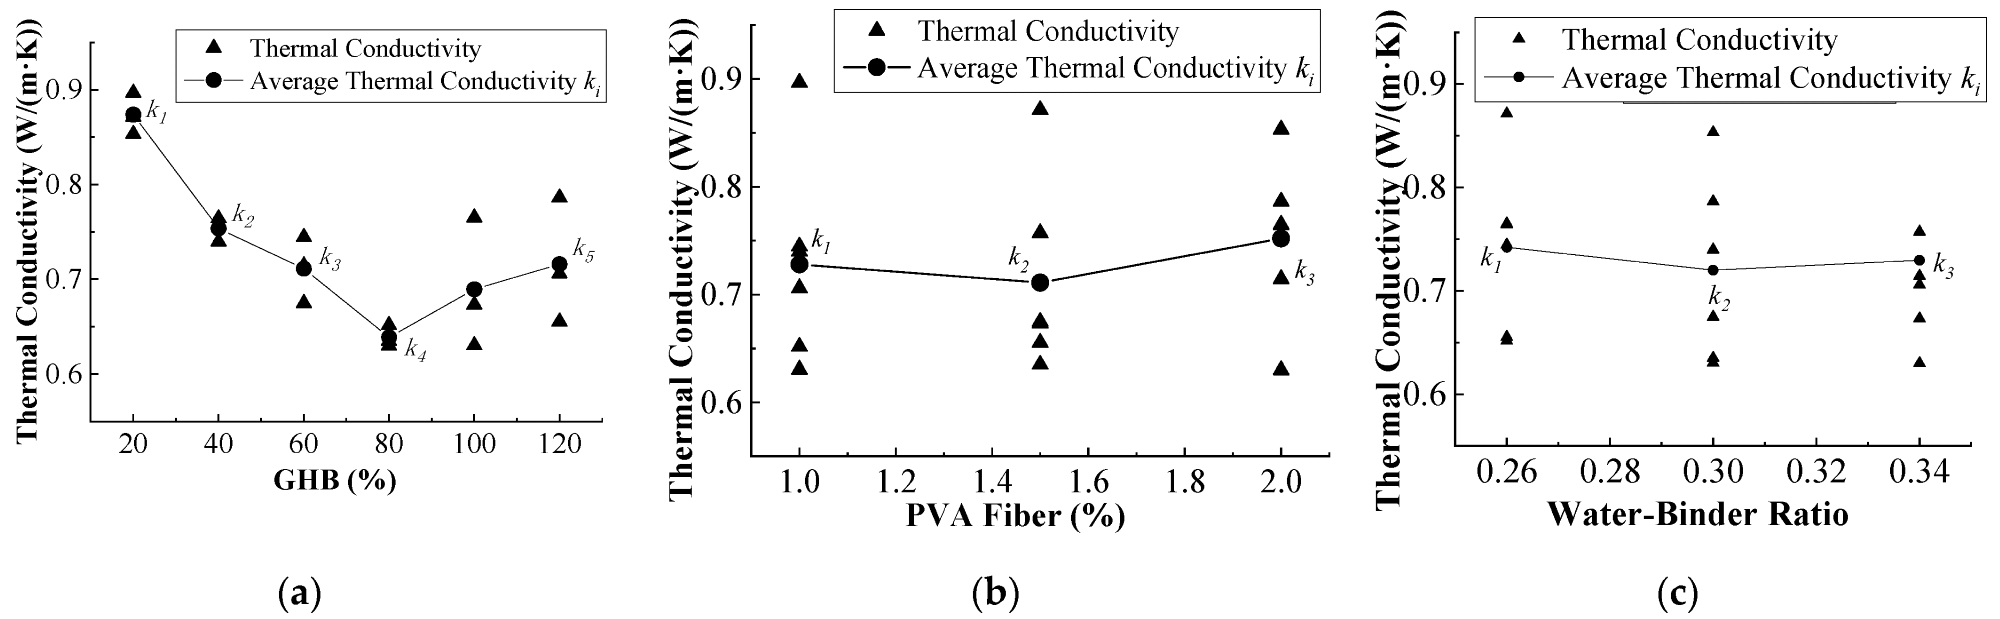 Relationship of GPCC thermal conductivity with each factor: (a) GHB content; (b) PVA fiber content; (c) water-binder ratio.